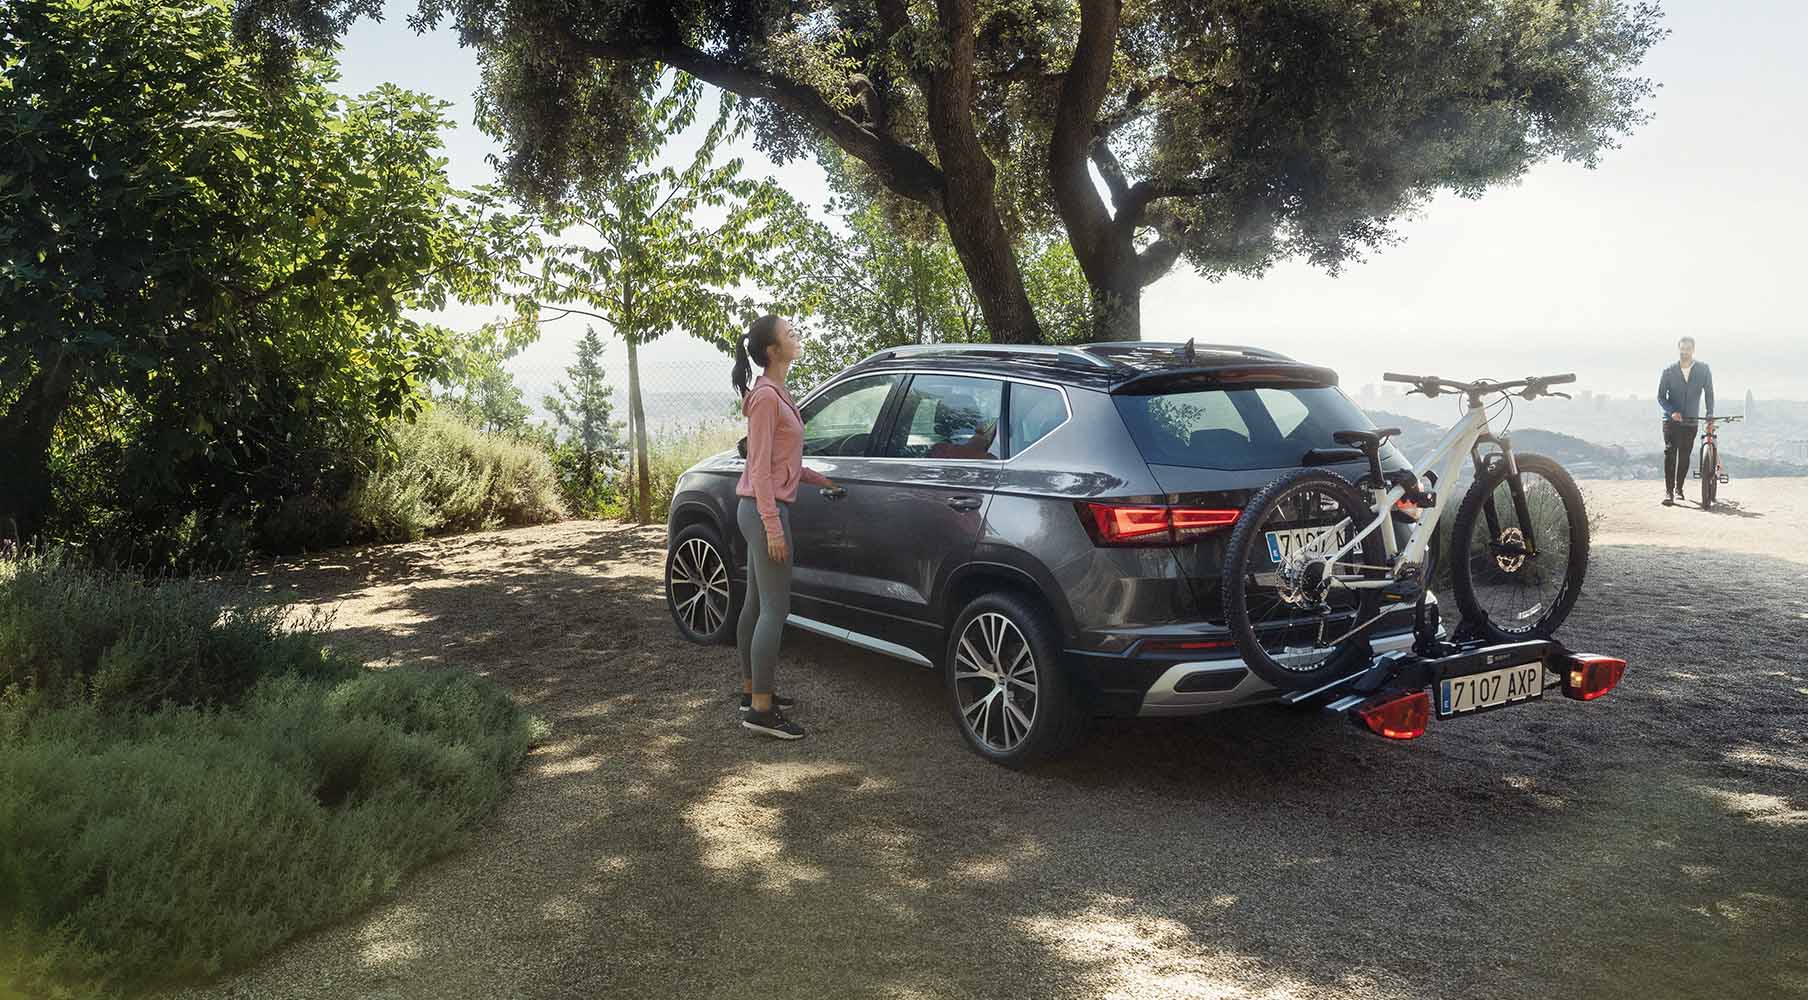 Sunlit scene of a dark grey SEAT Ateca 2024 equipped with a bike rack, parked on a gravel path by the coast. A man stands by the car, facing the ocean. Large trees and greenery surround the area, enhancing the serene coastal vibe.